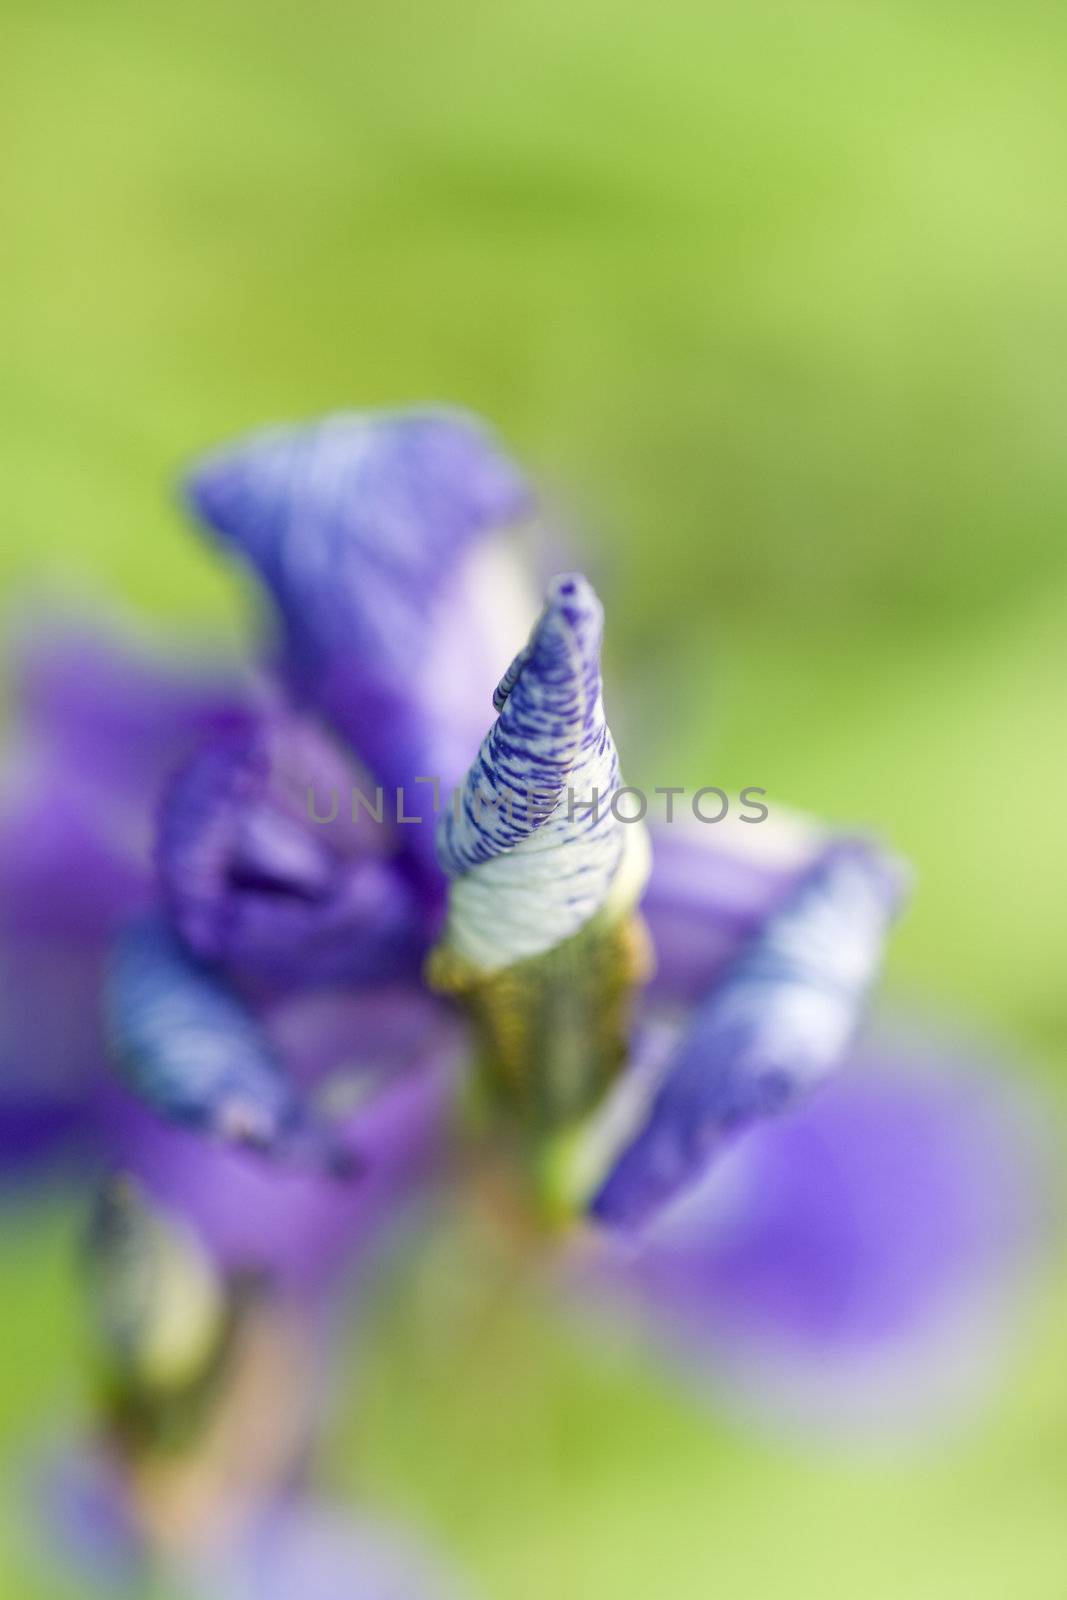 Selective focus on the top flower of a blue iris, the remainder of the image nicely blurred.